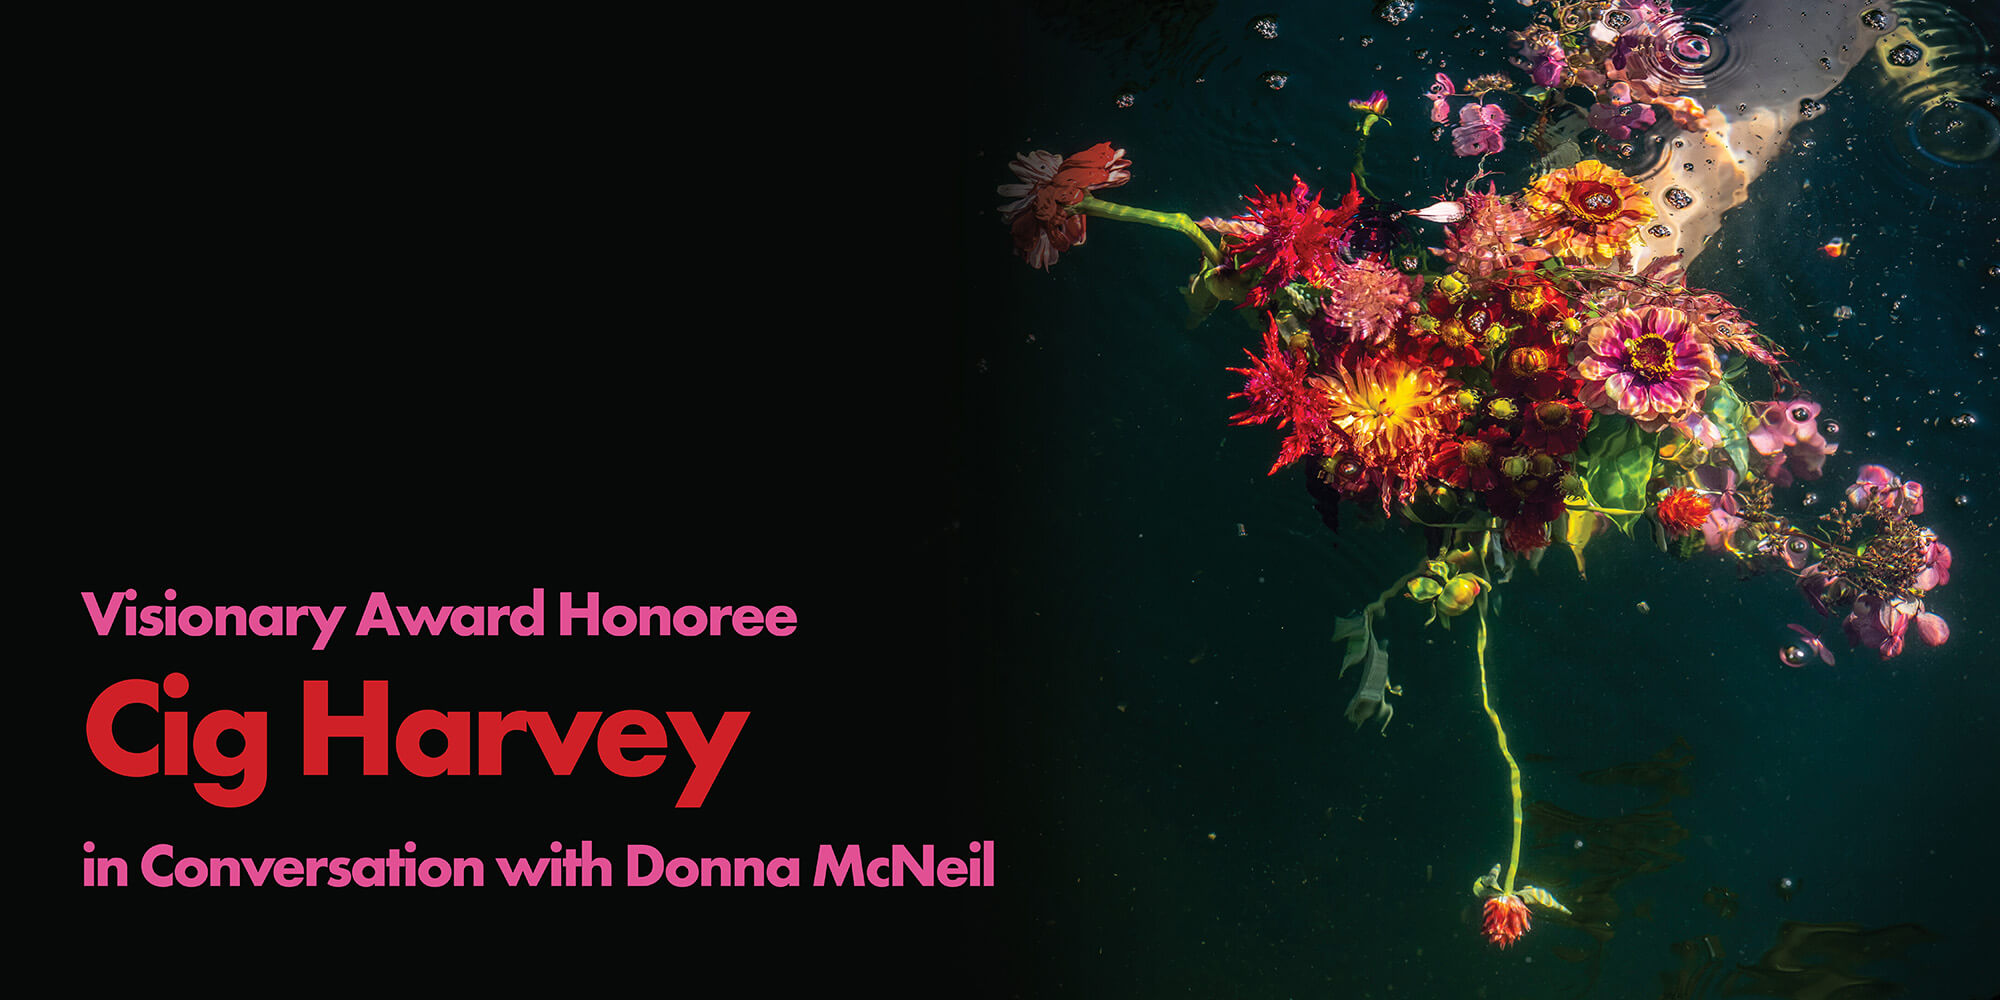 Cig Harvey in Conversation with Donna McNeil